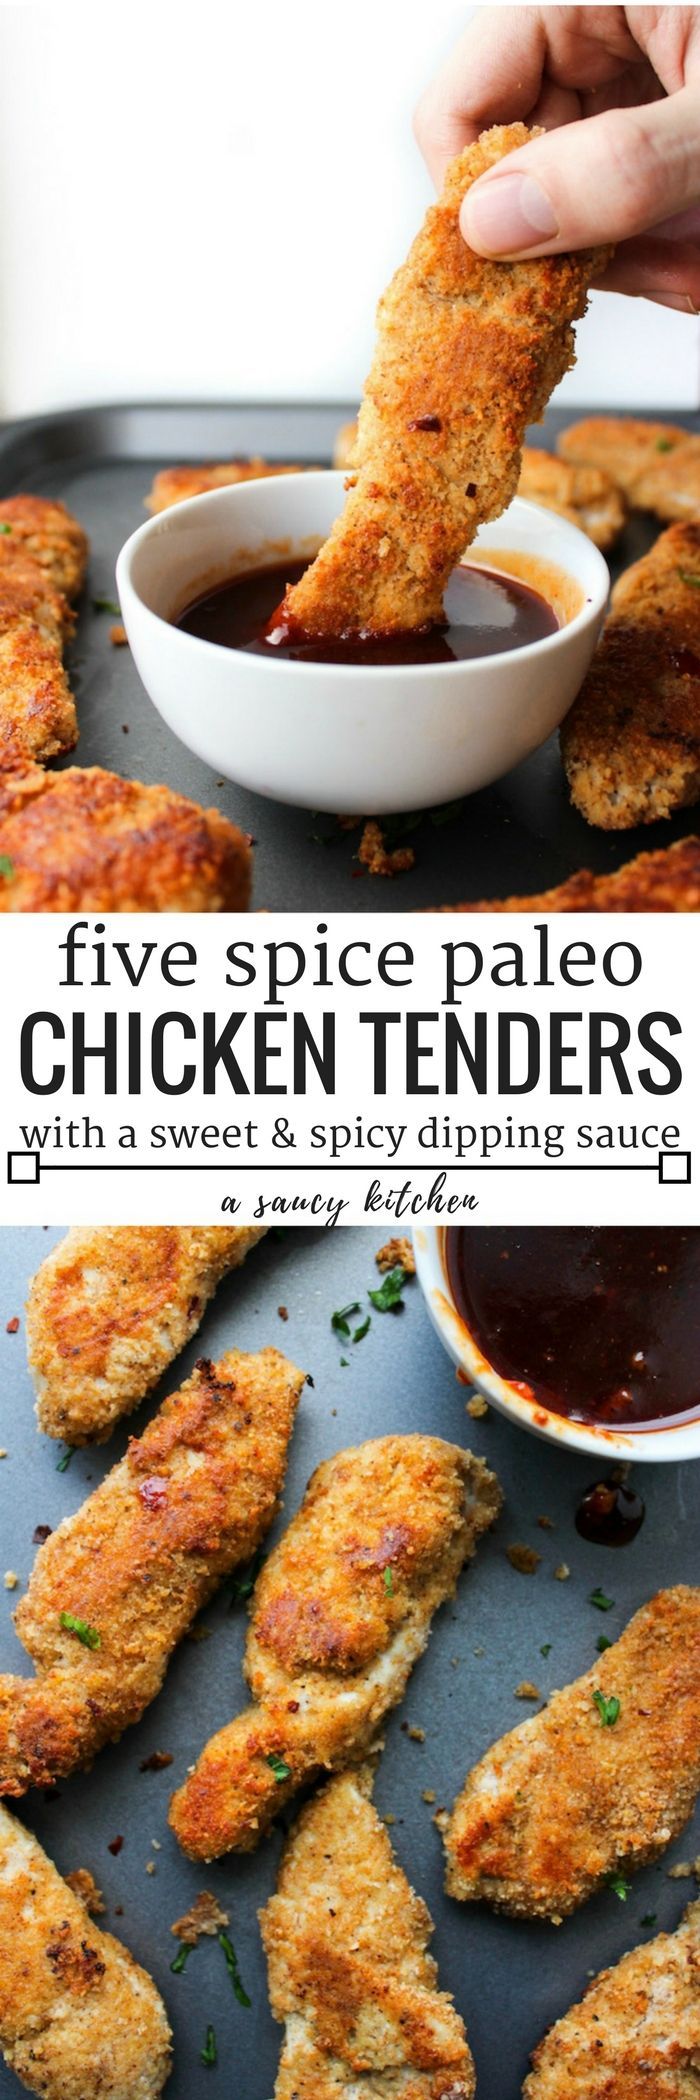 Paleo Chicken Tenders crusted in a almond flour blen with Chinese five spice & a sweet & spicy Asian sauce | Gluten Free + Low